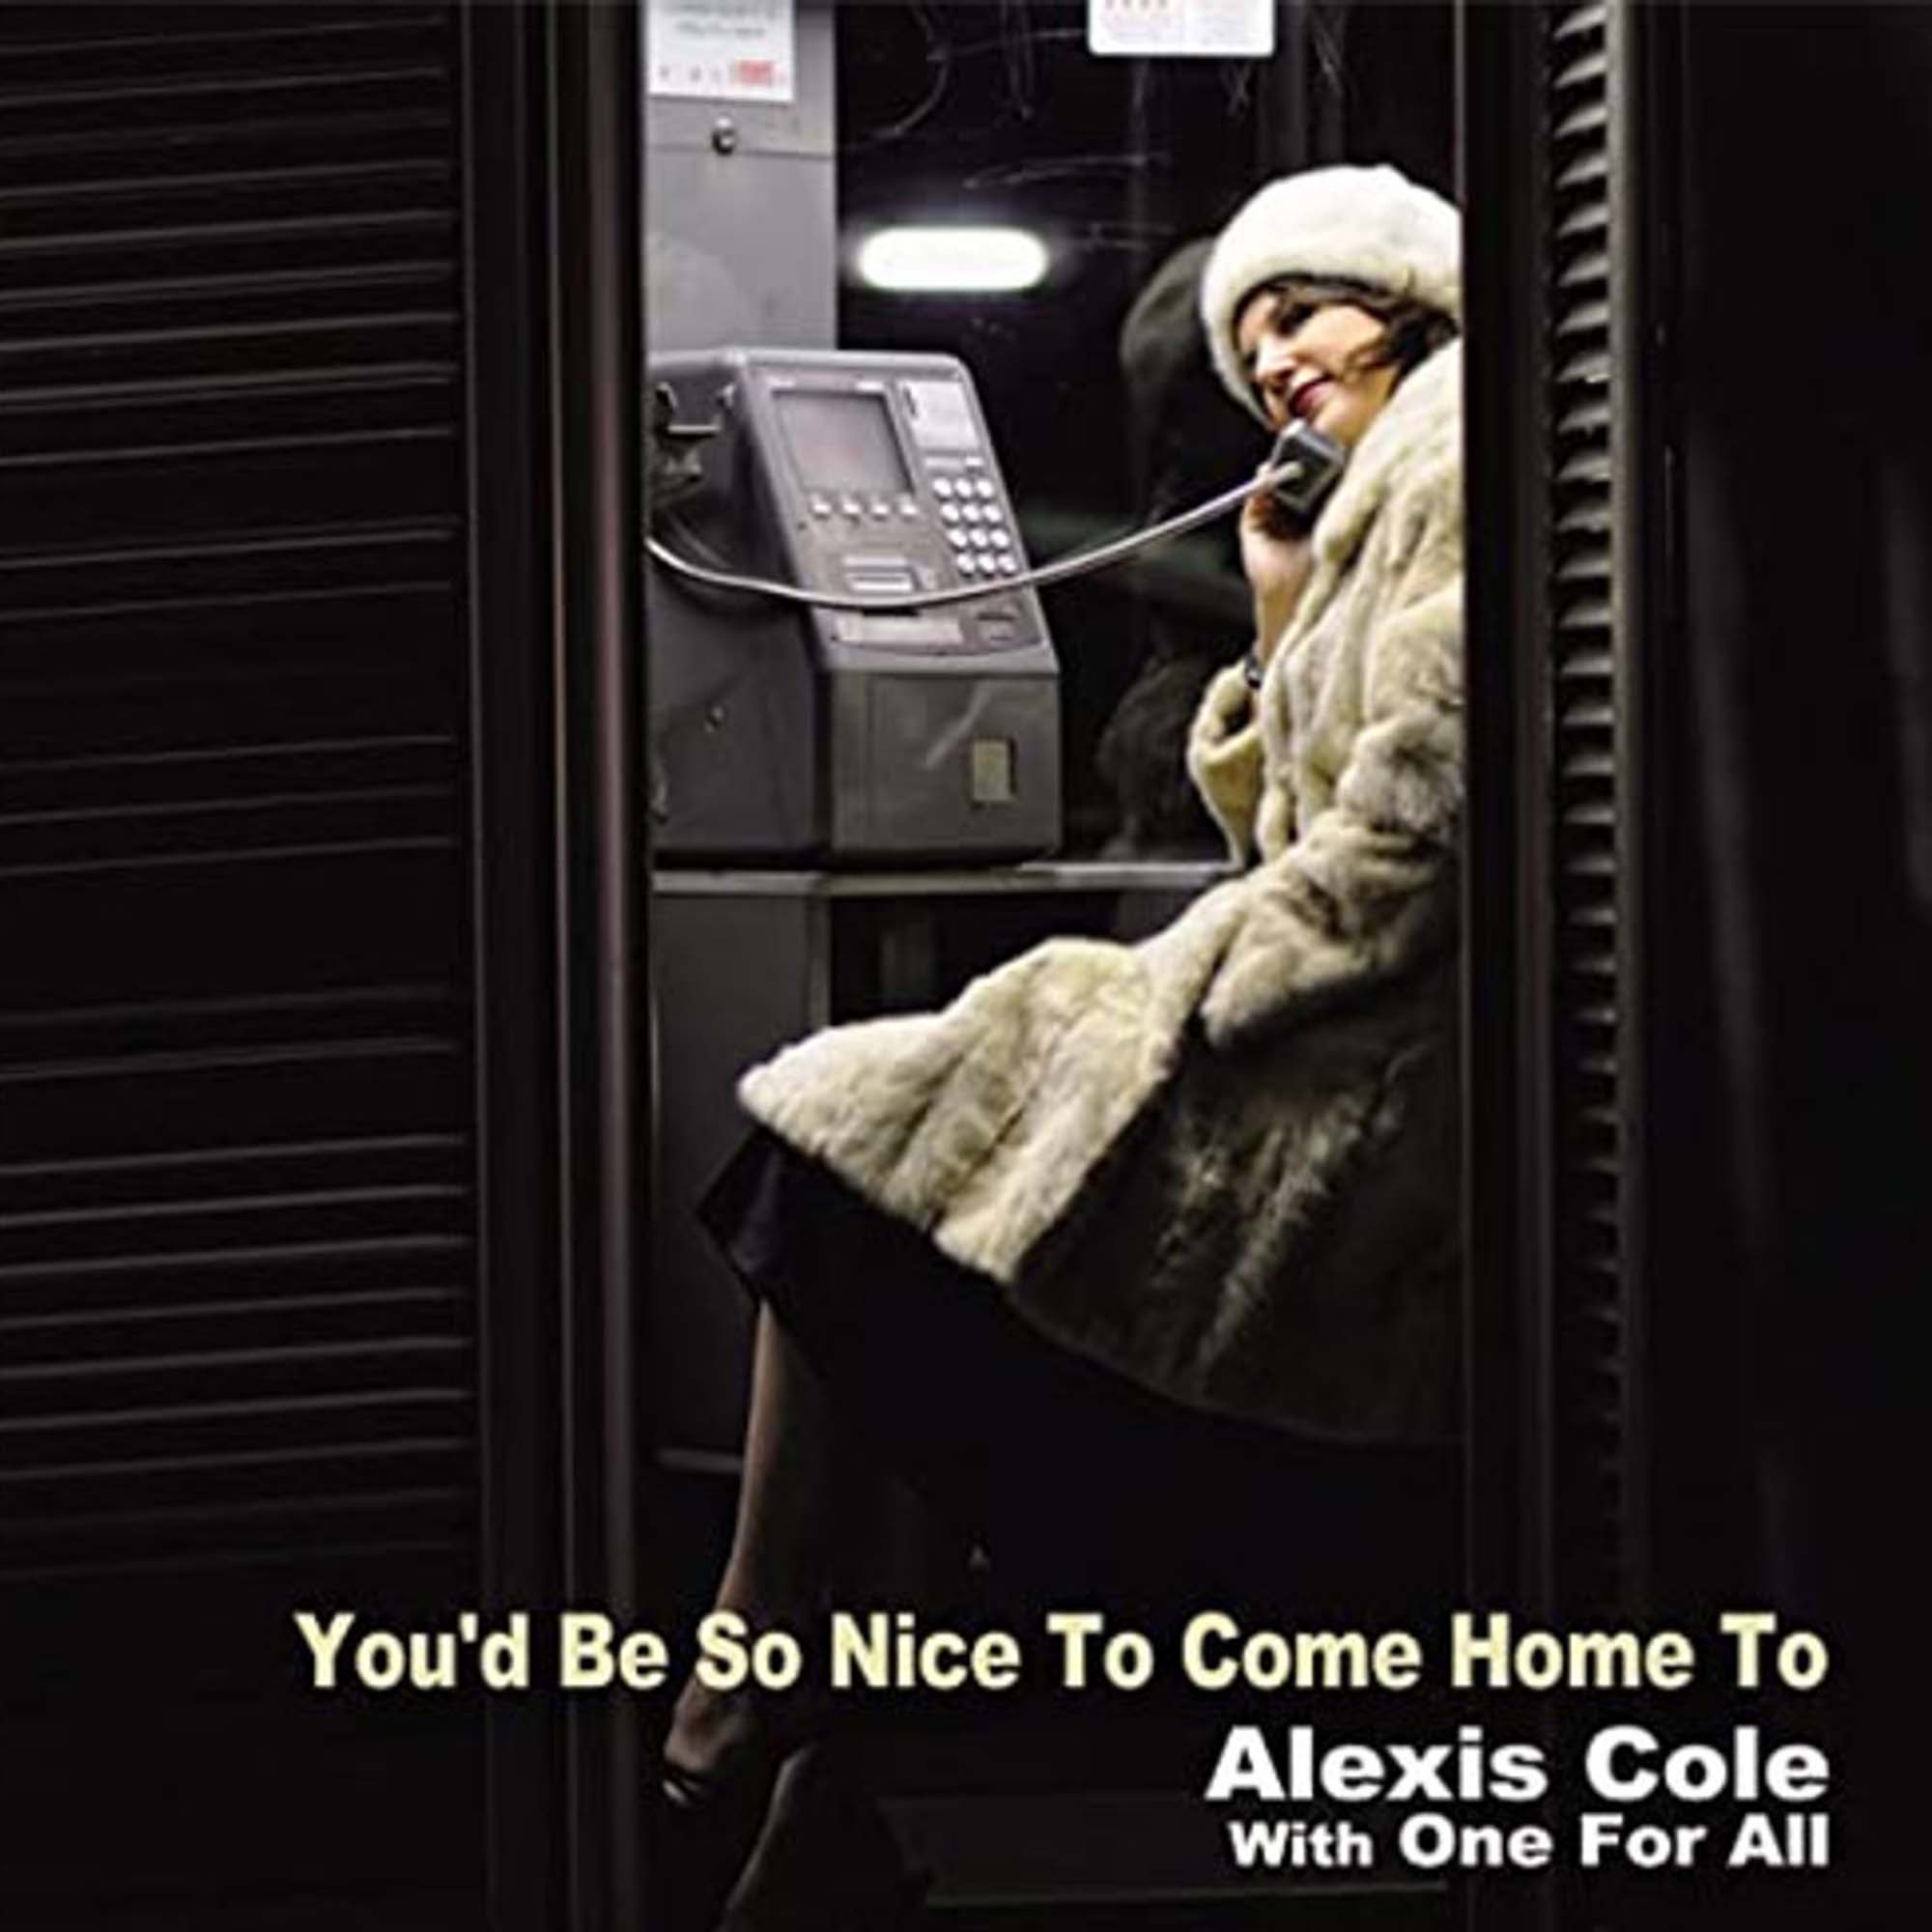 The cheapest tickets to the homecoming. Alexis Cole. You'd be so nice to come Home. Alexis Cole - Dazzling Blue. Venus record.